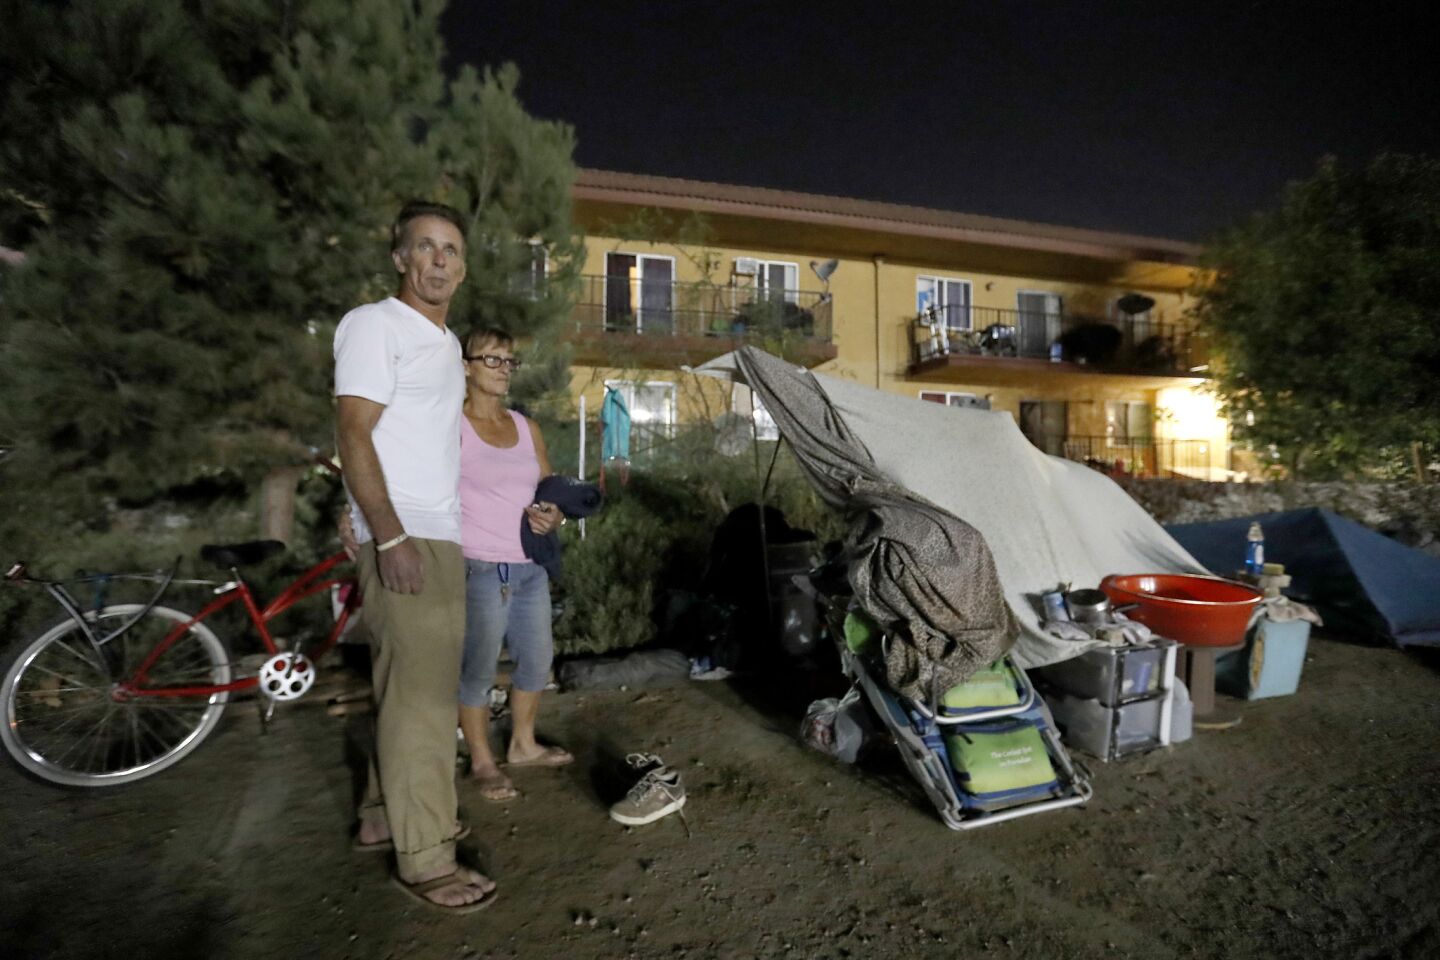 Larry Ford, 53, left and Lisa Weber, 57, join a large group of homeless campers who face eviction on Friday from their encampment between Warner Ave. and Edinger Ave. along the Santa Ana River trail.